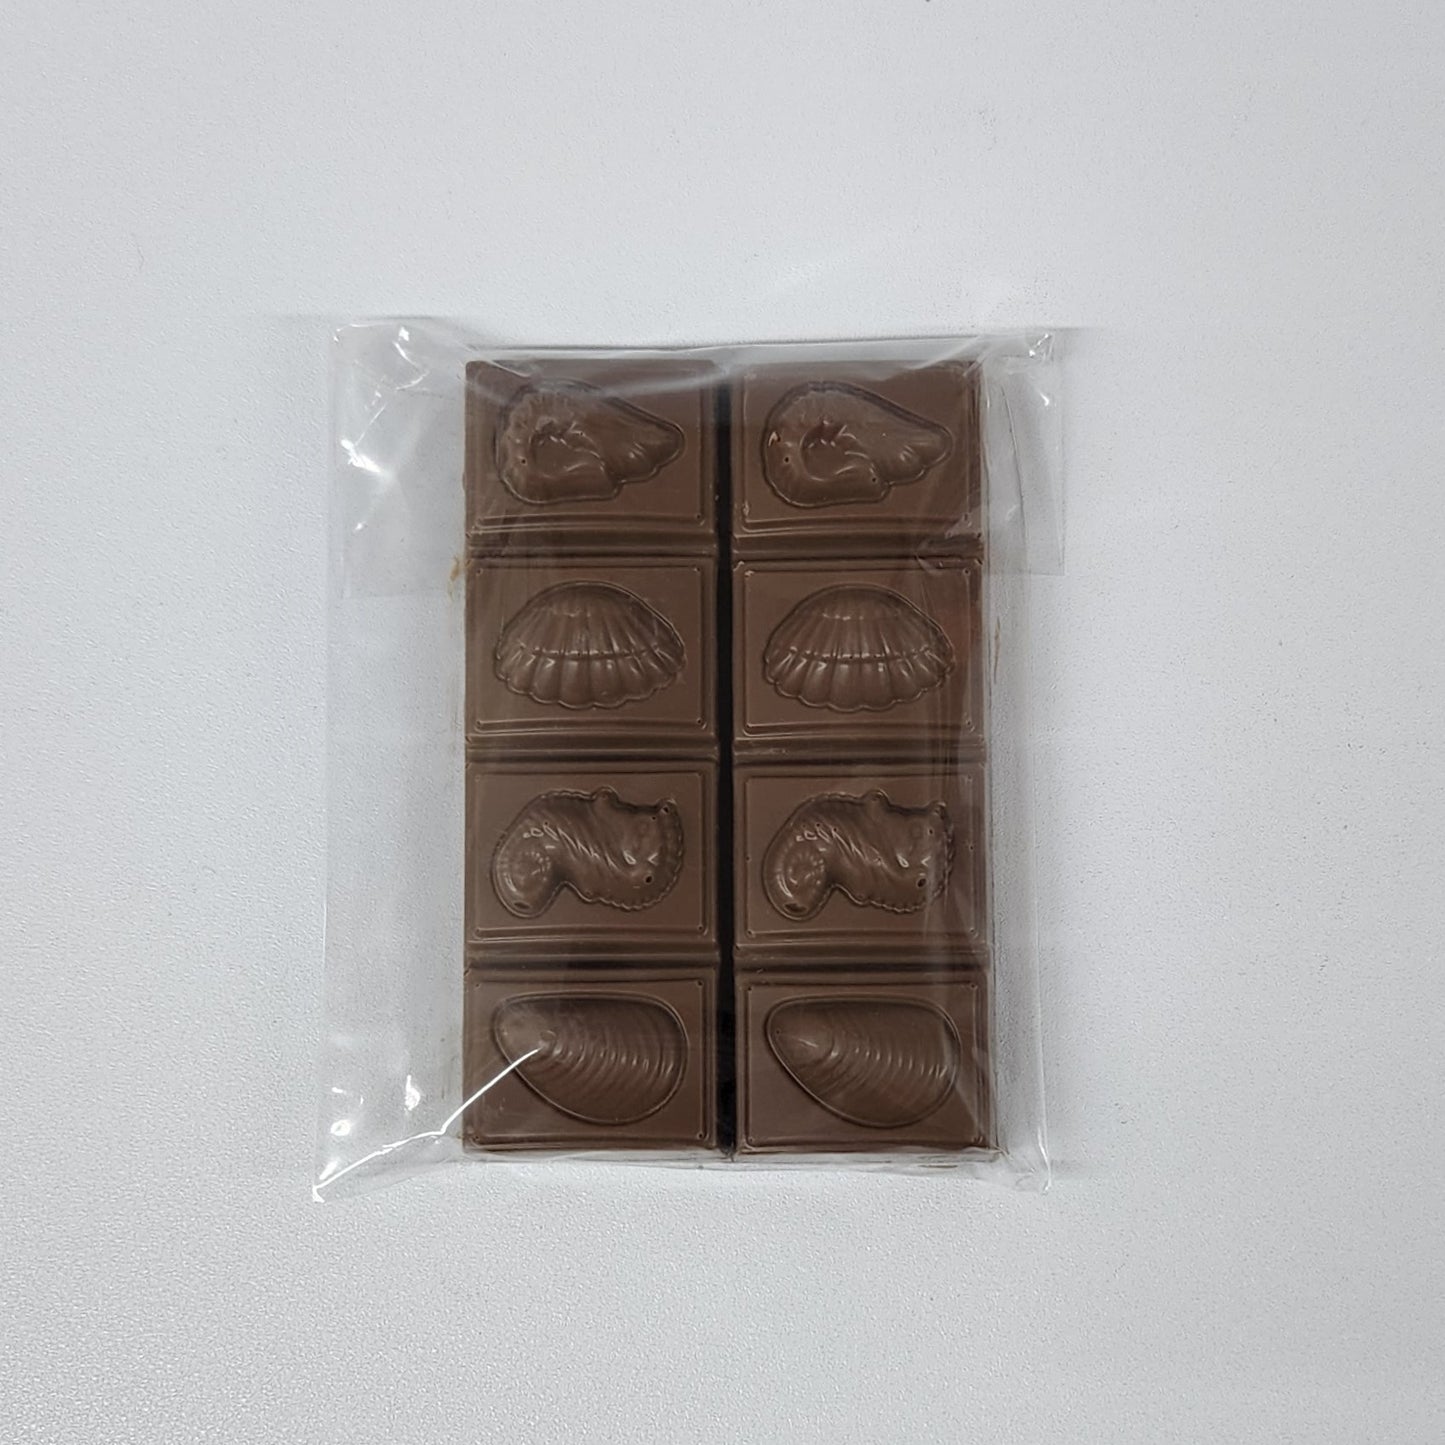 Milk chocolate bars imprinted with sea shells and sea creatures